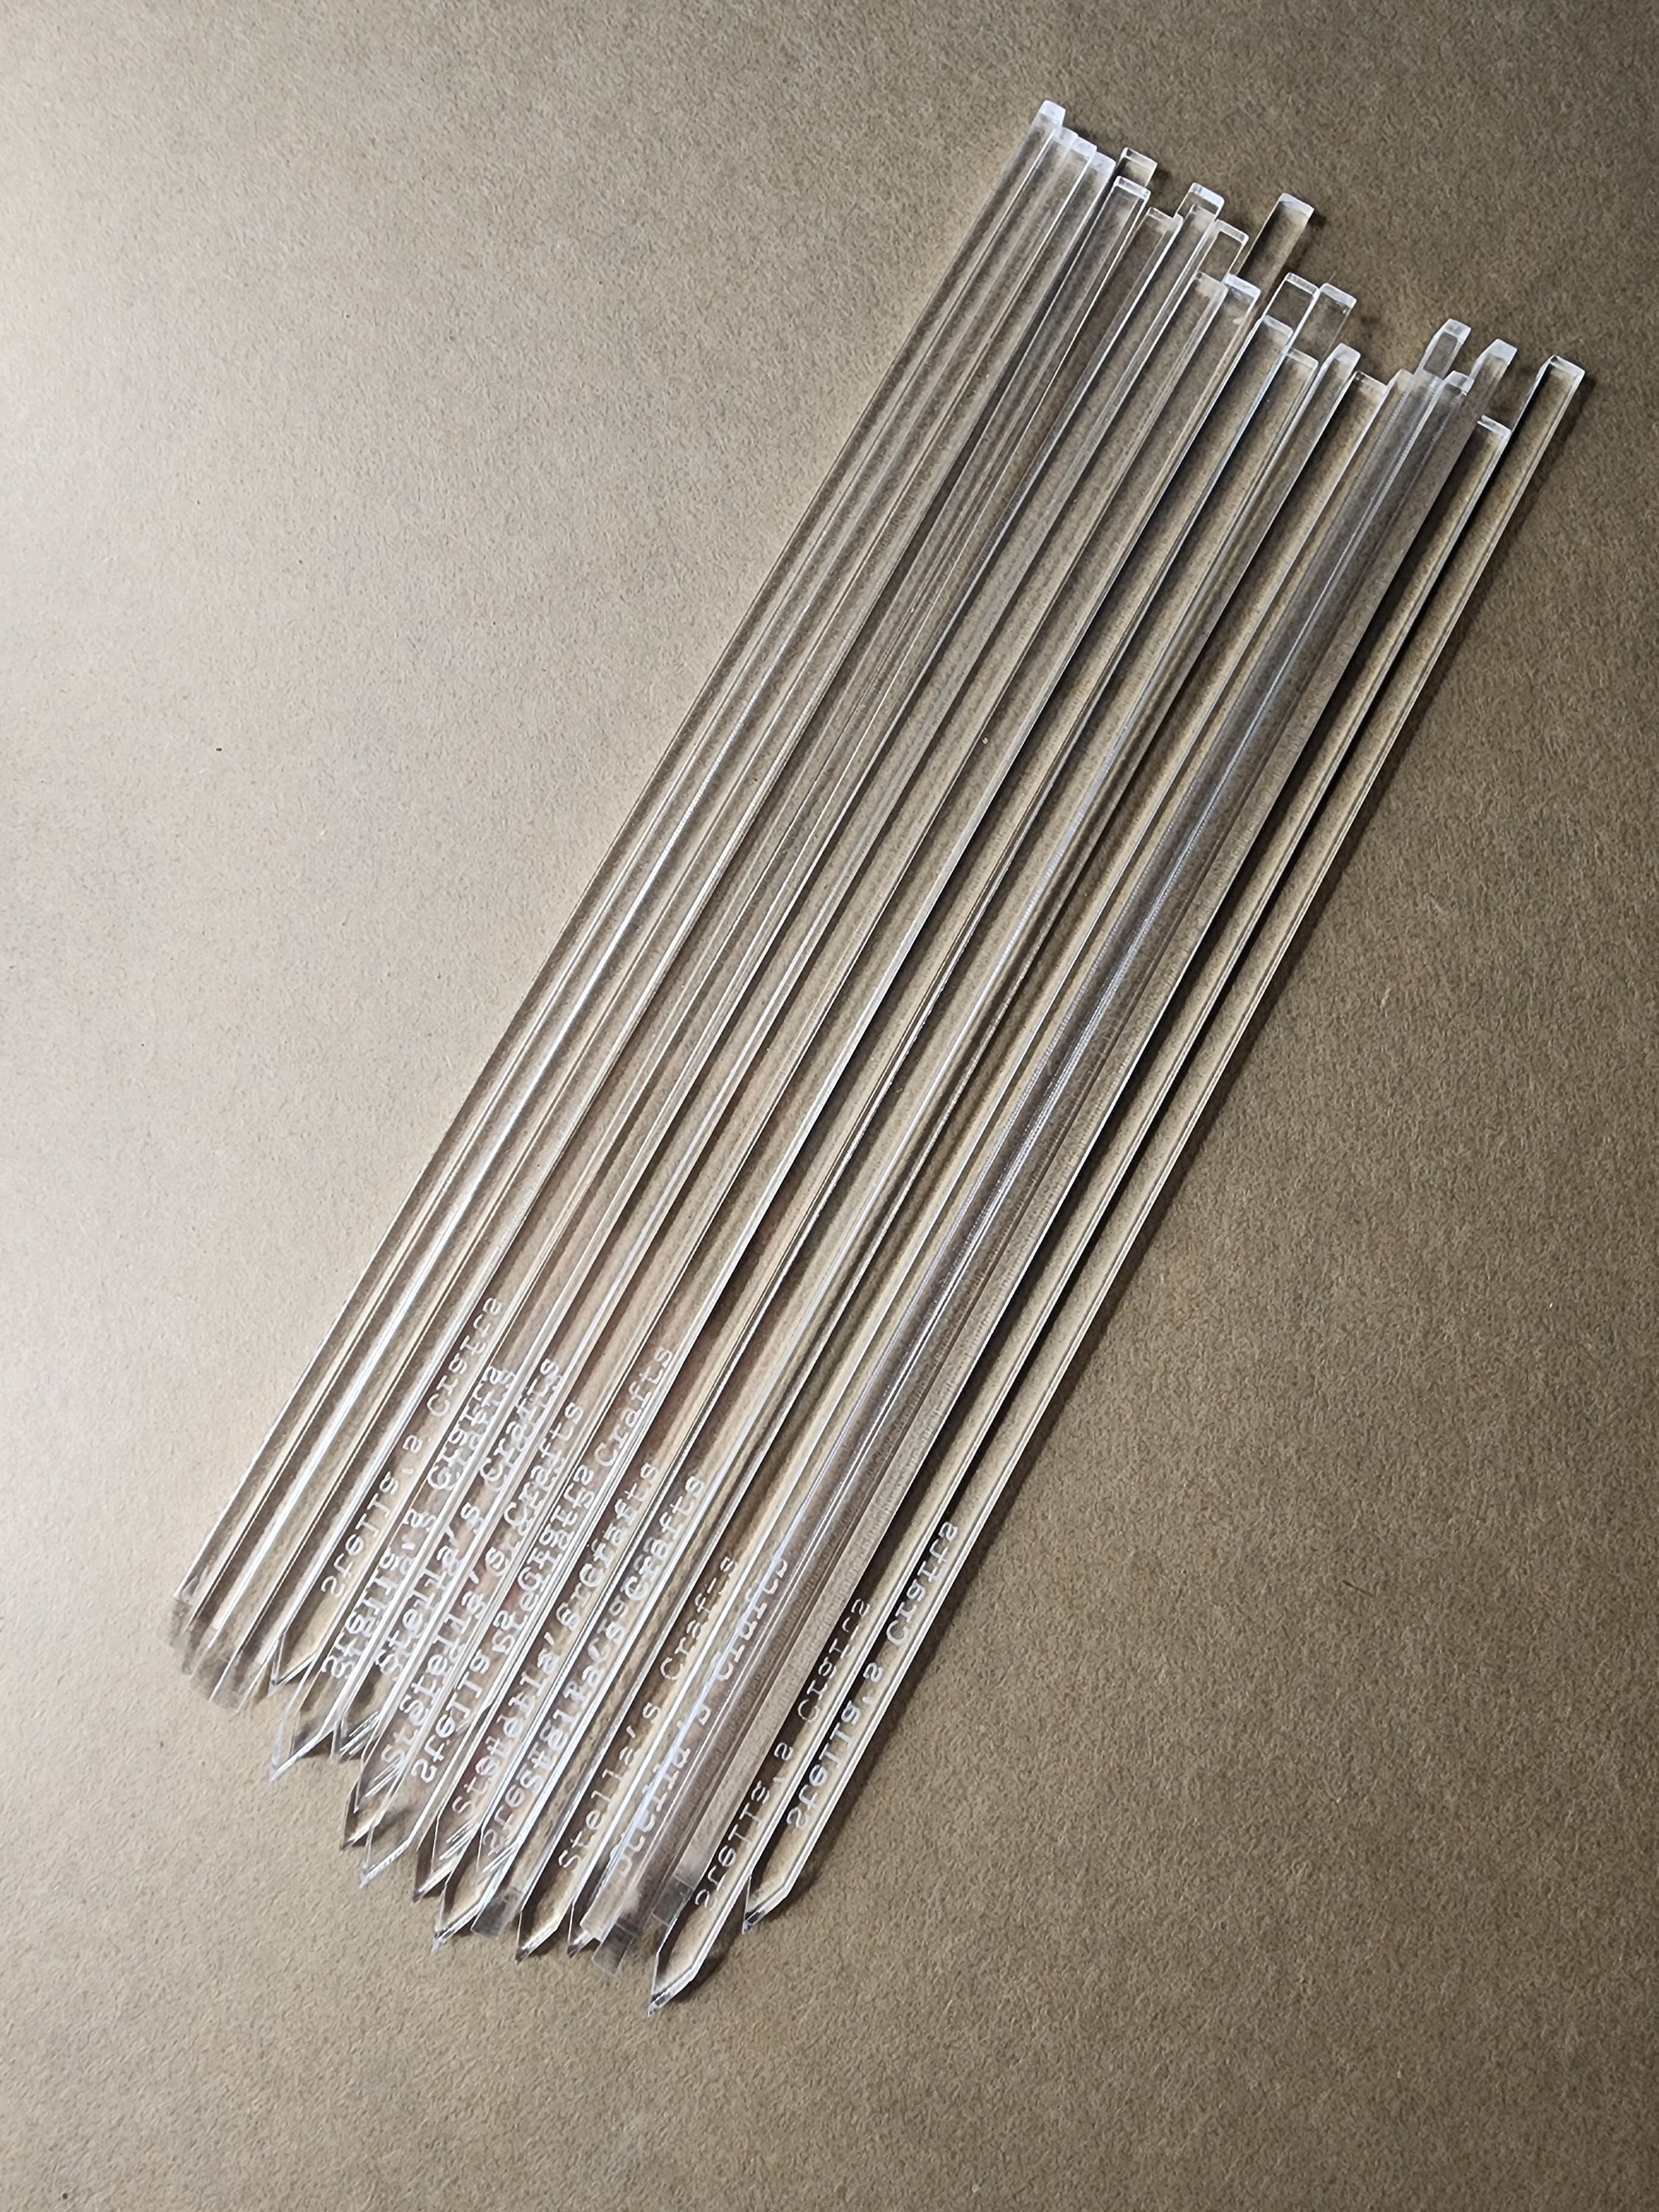 Solid Crystal Clear Acrylic Cake Topper Sticks - 3.5 long - 25-pack